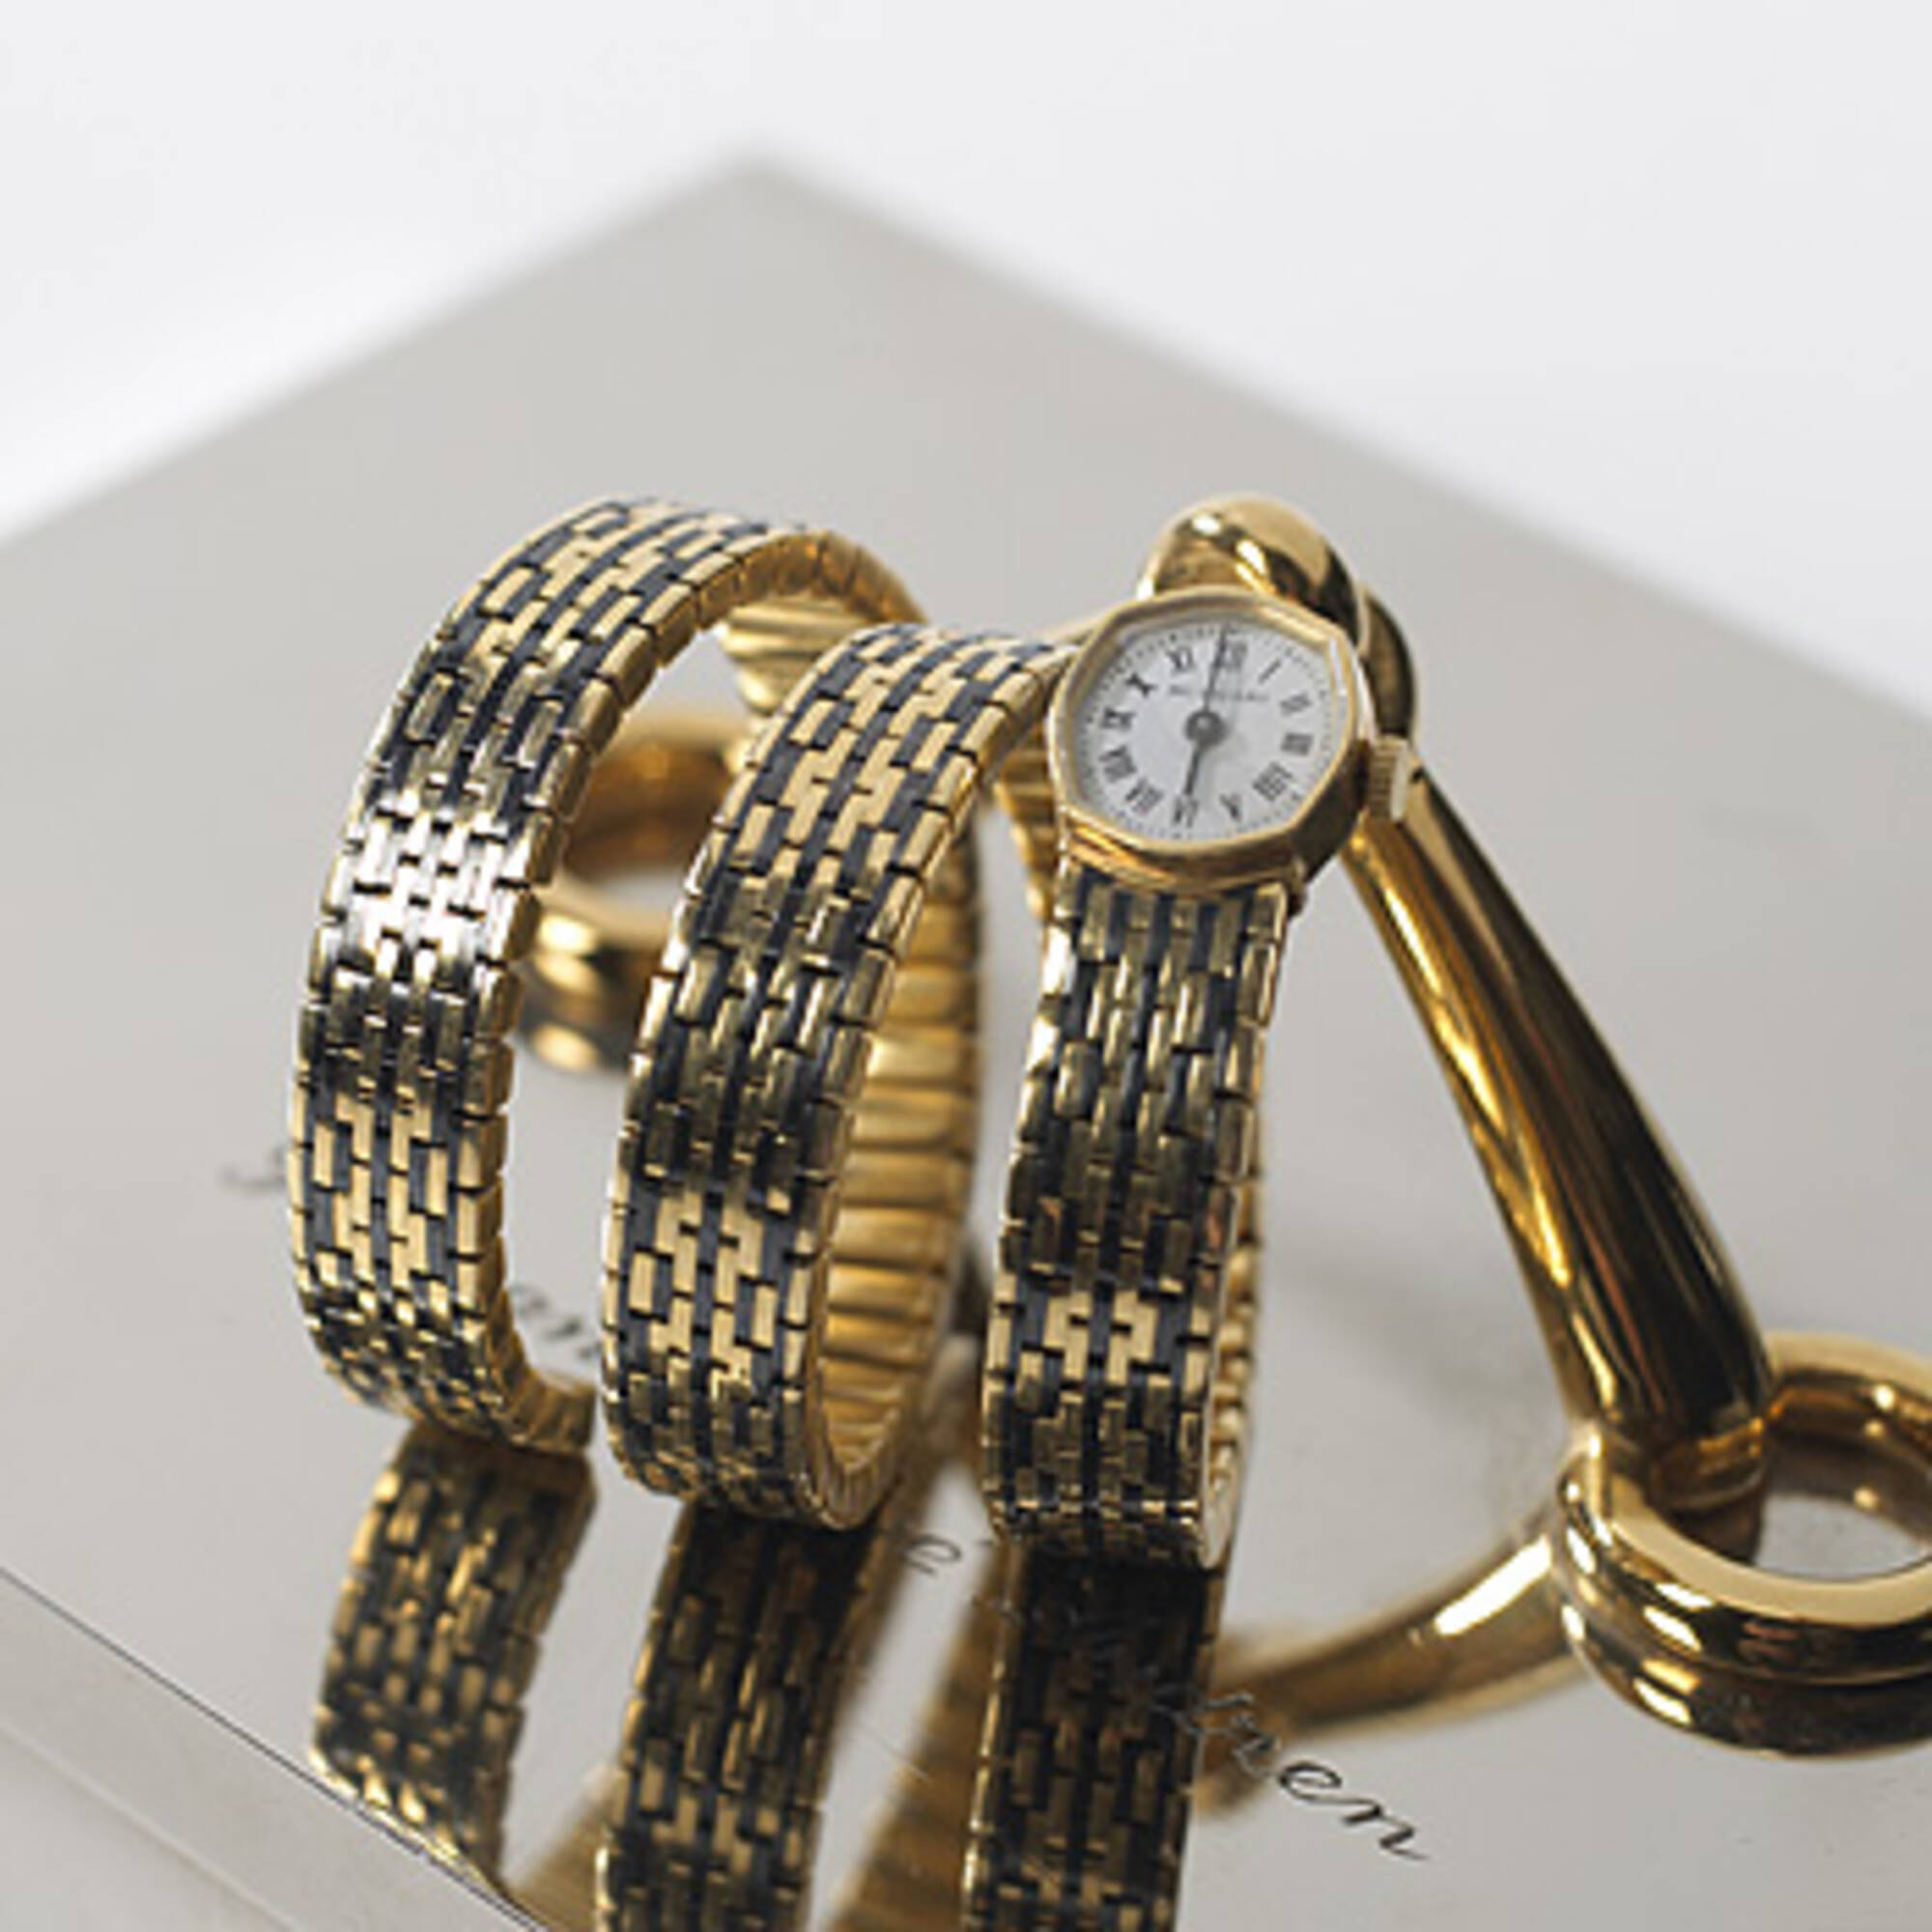 386: BULGARI, wrist watch < Branded Luxury, 14 June 2005 < Auctions |  Wright: Auctions of Art and Design